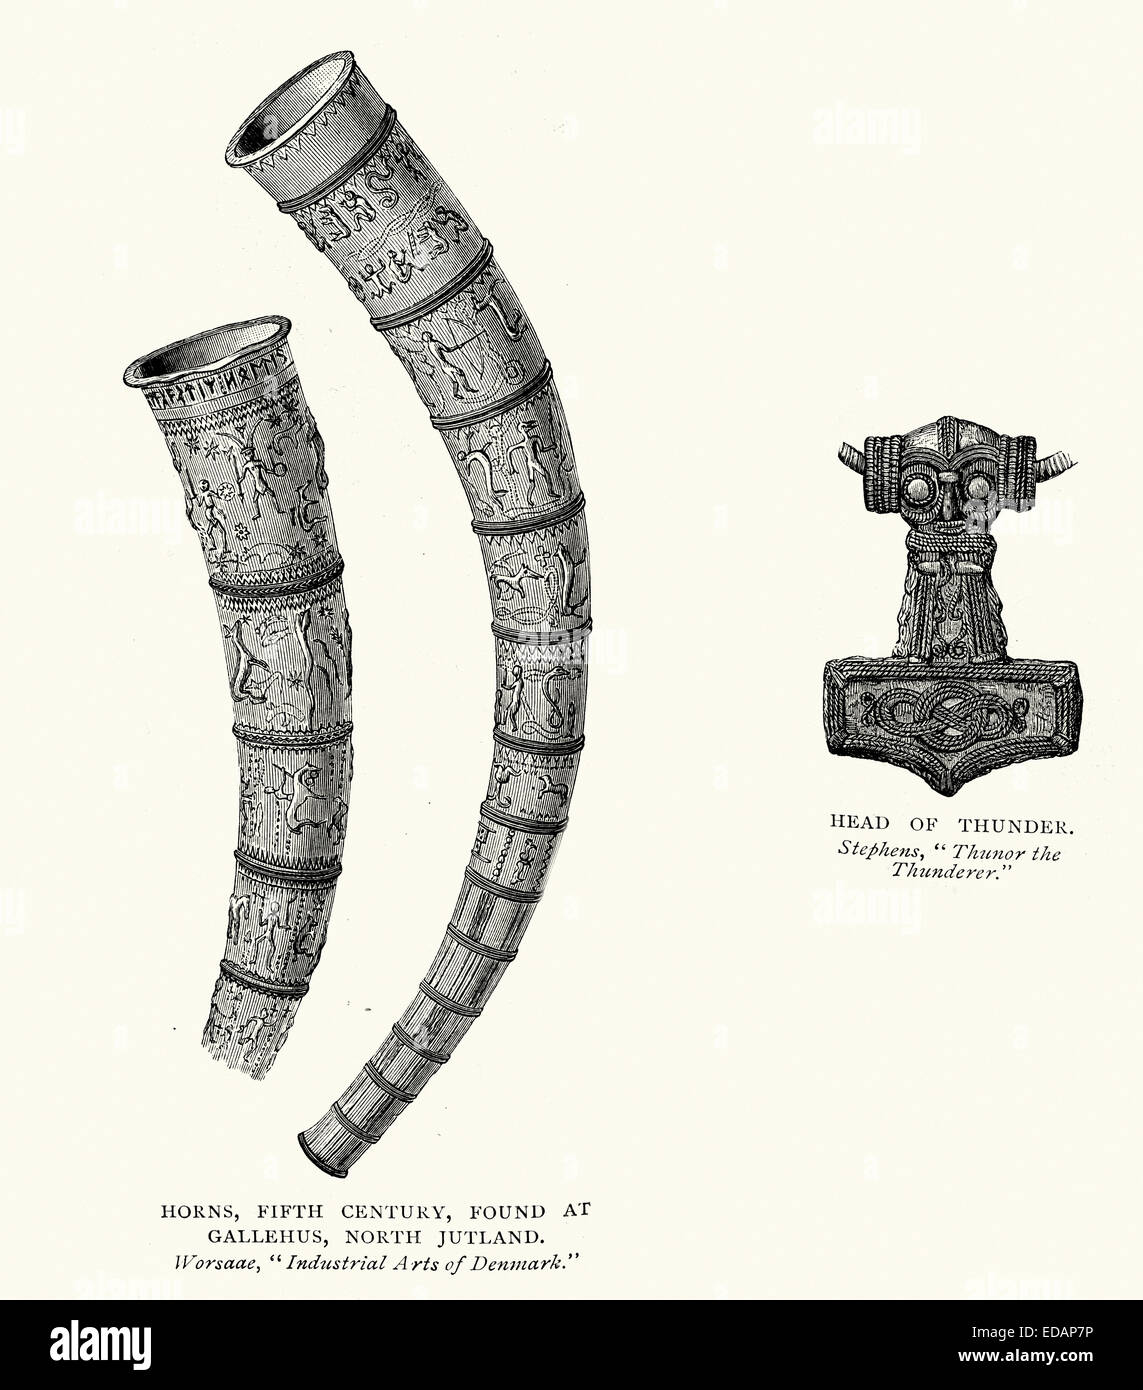 Norse and viking artifacts, 5th Century Horn found at Gallehus, North Jutland and Head of Thor the Thunder Stock Photo